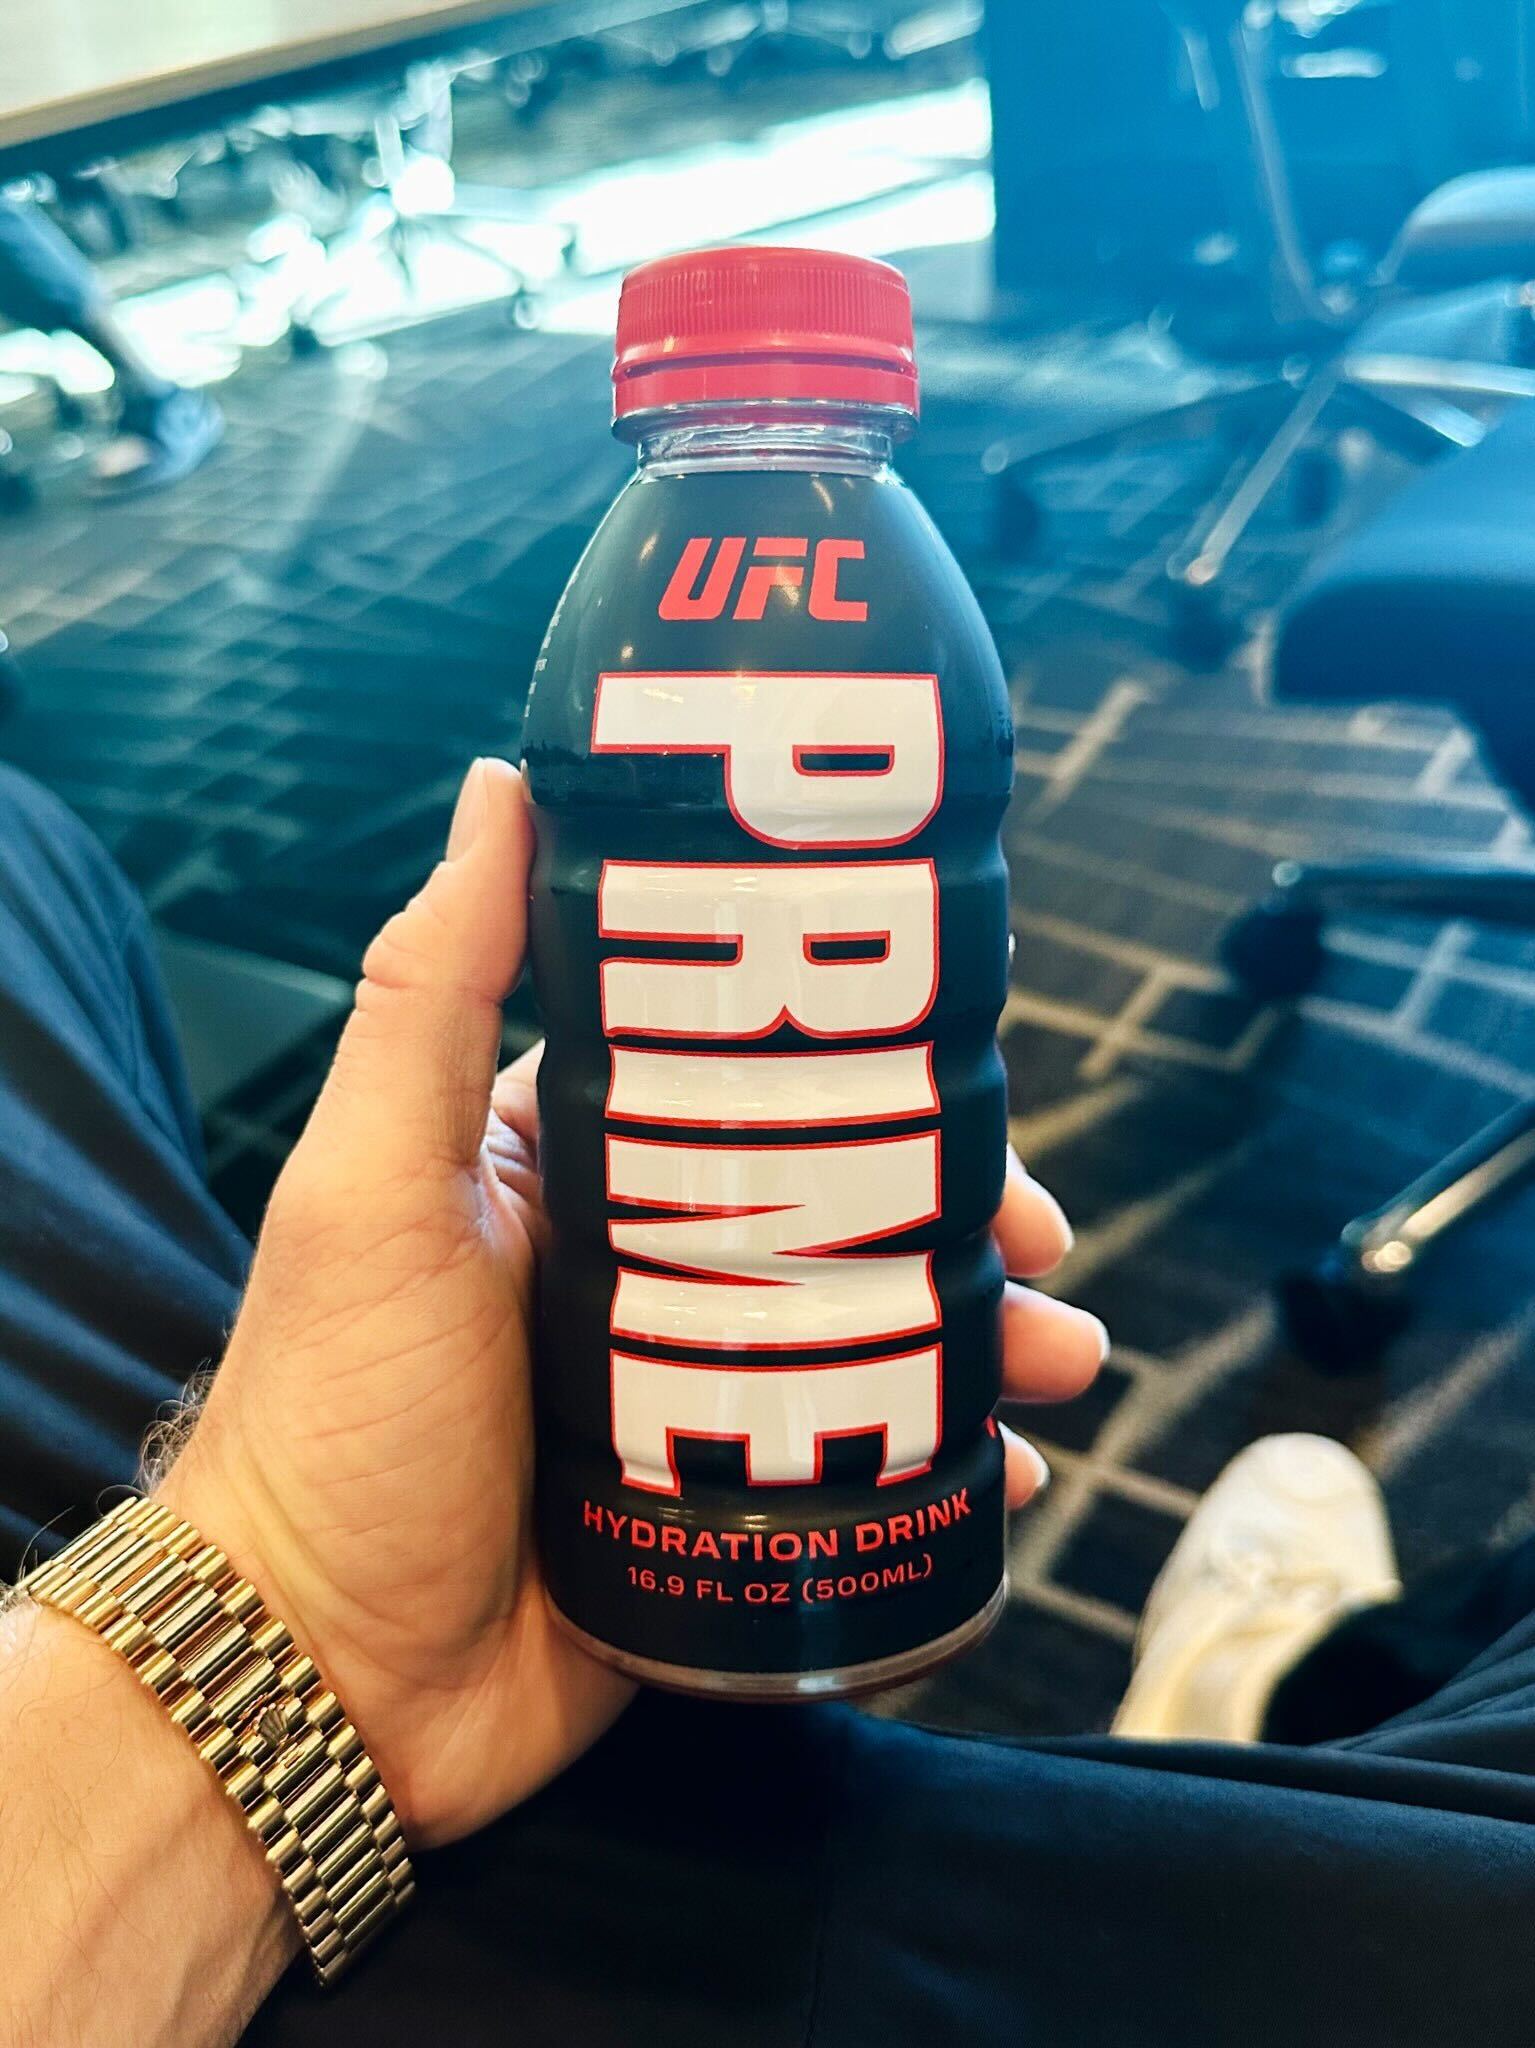 Dexerto on X: The Prime x UFC sports drink bottle